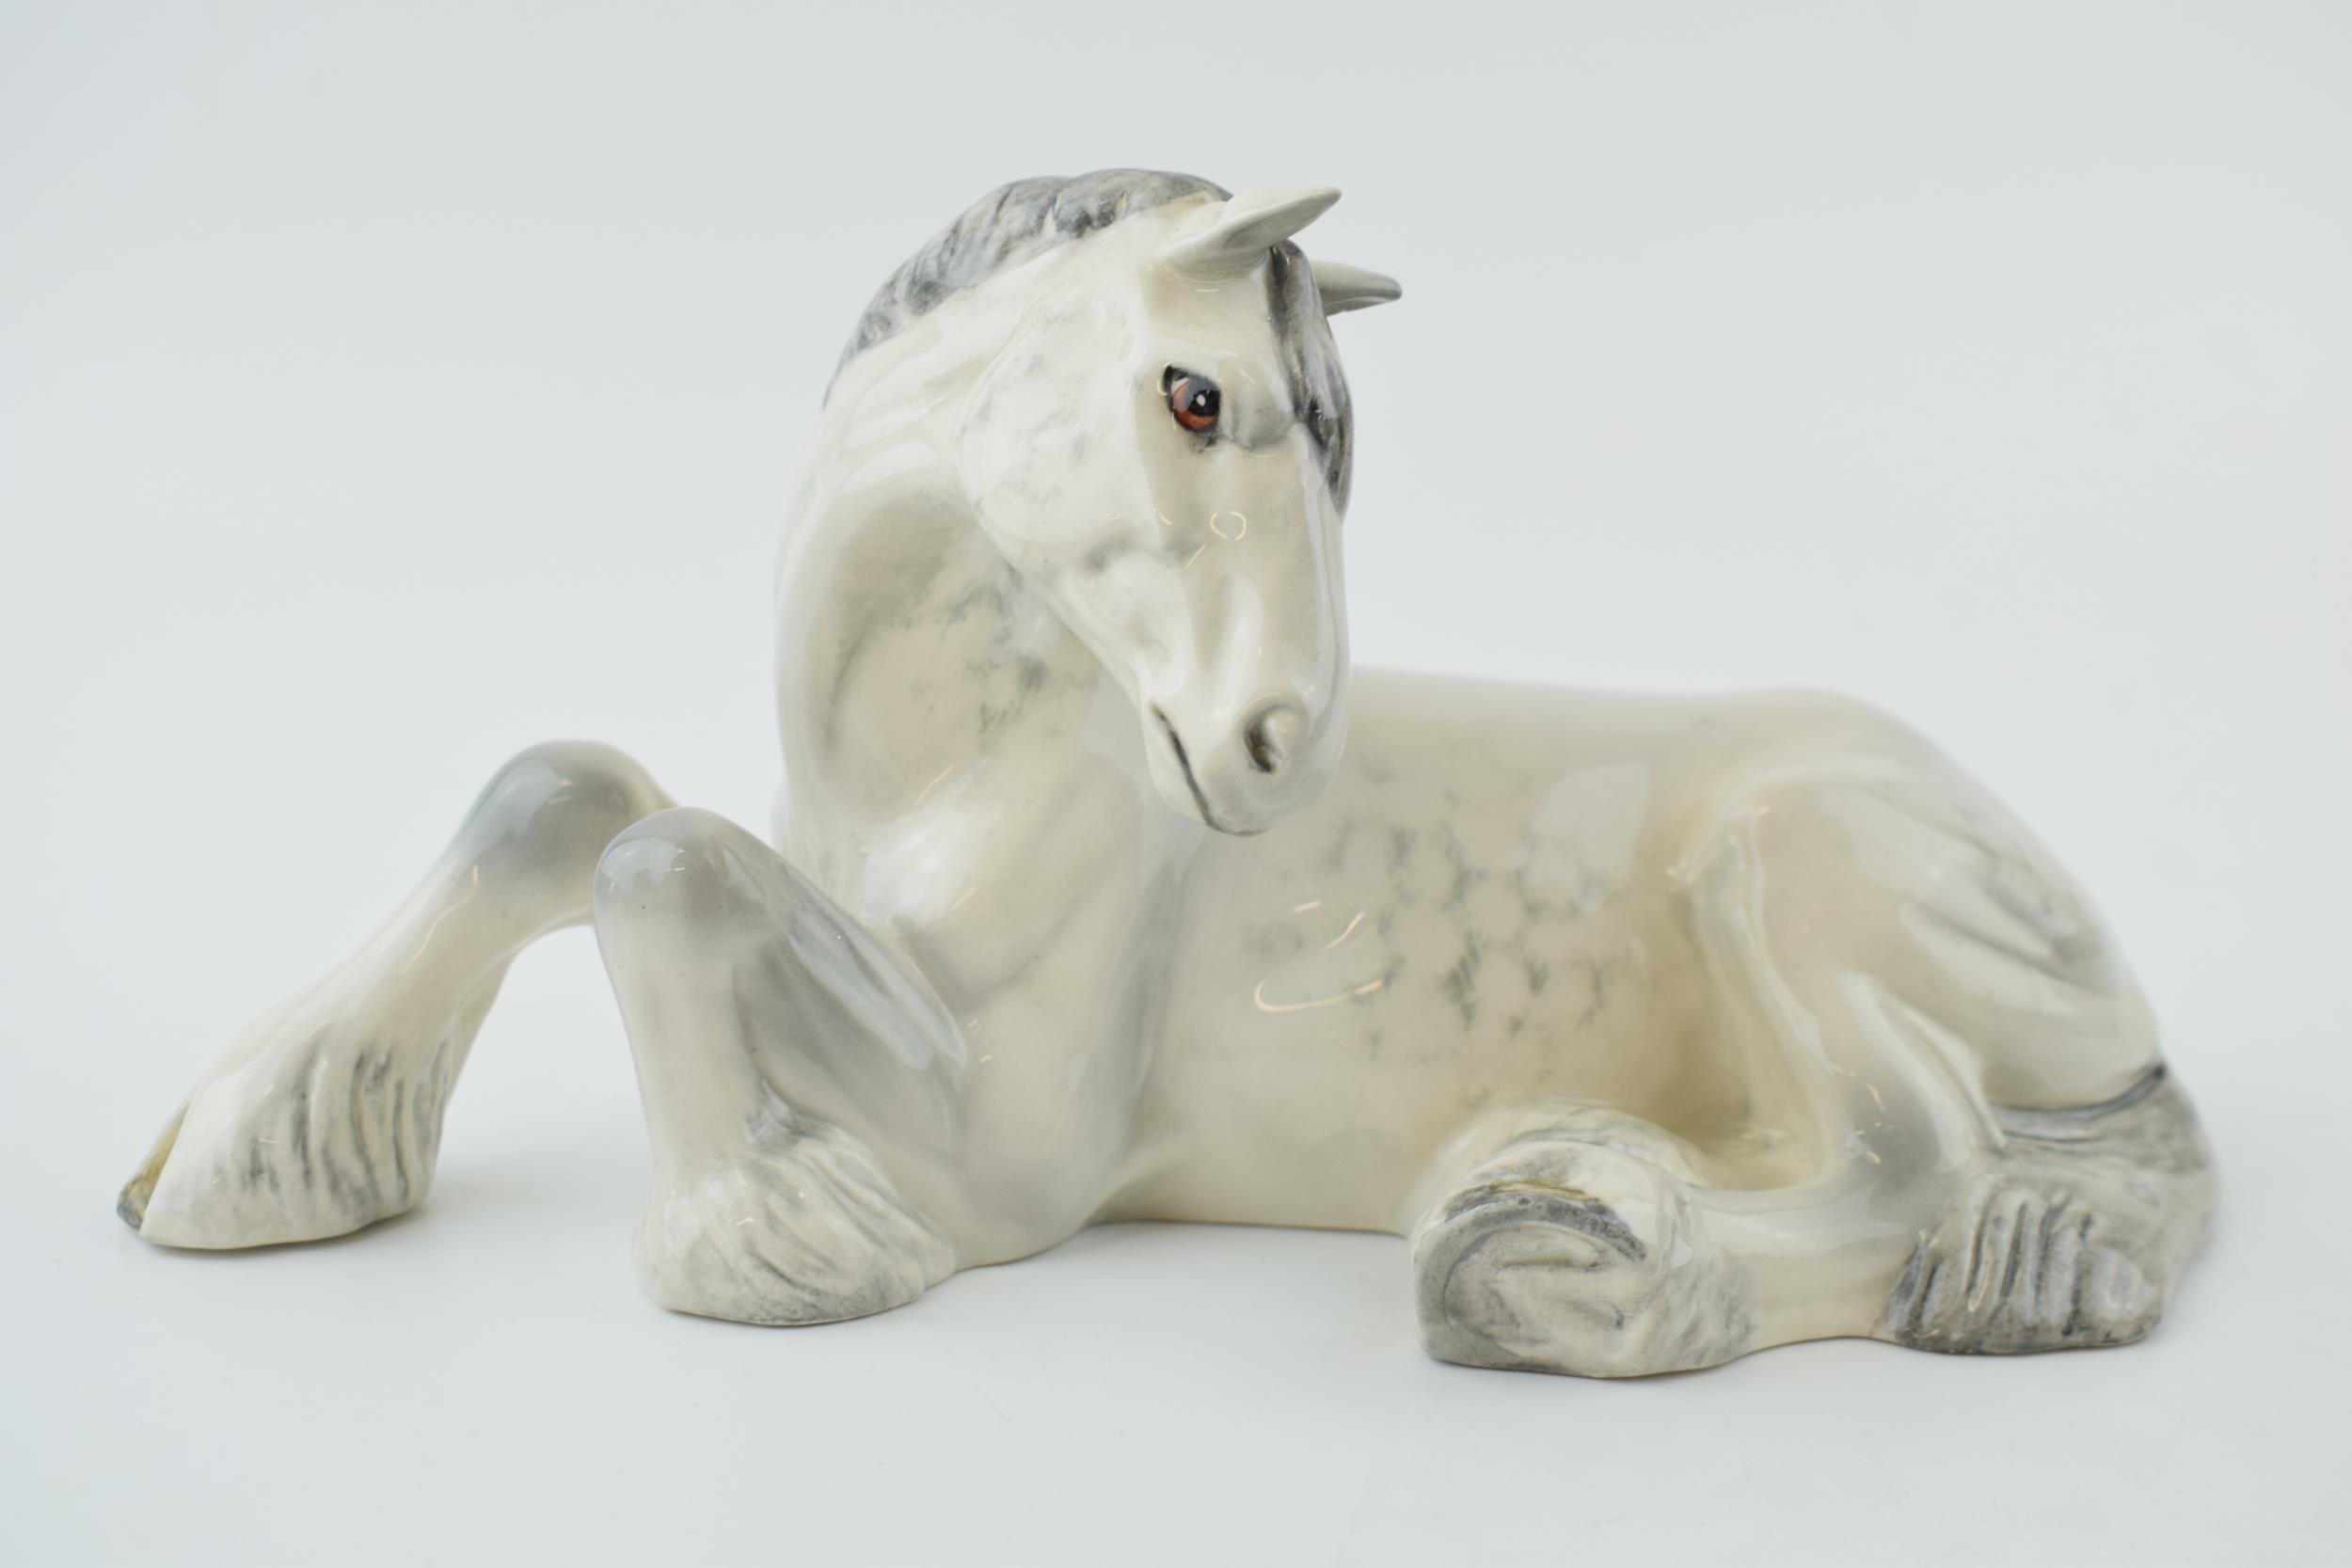 Beswick Shire Horse lying down dapple grey 2459. 12cm tall In good condition without any obvious